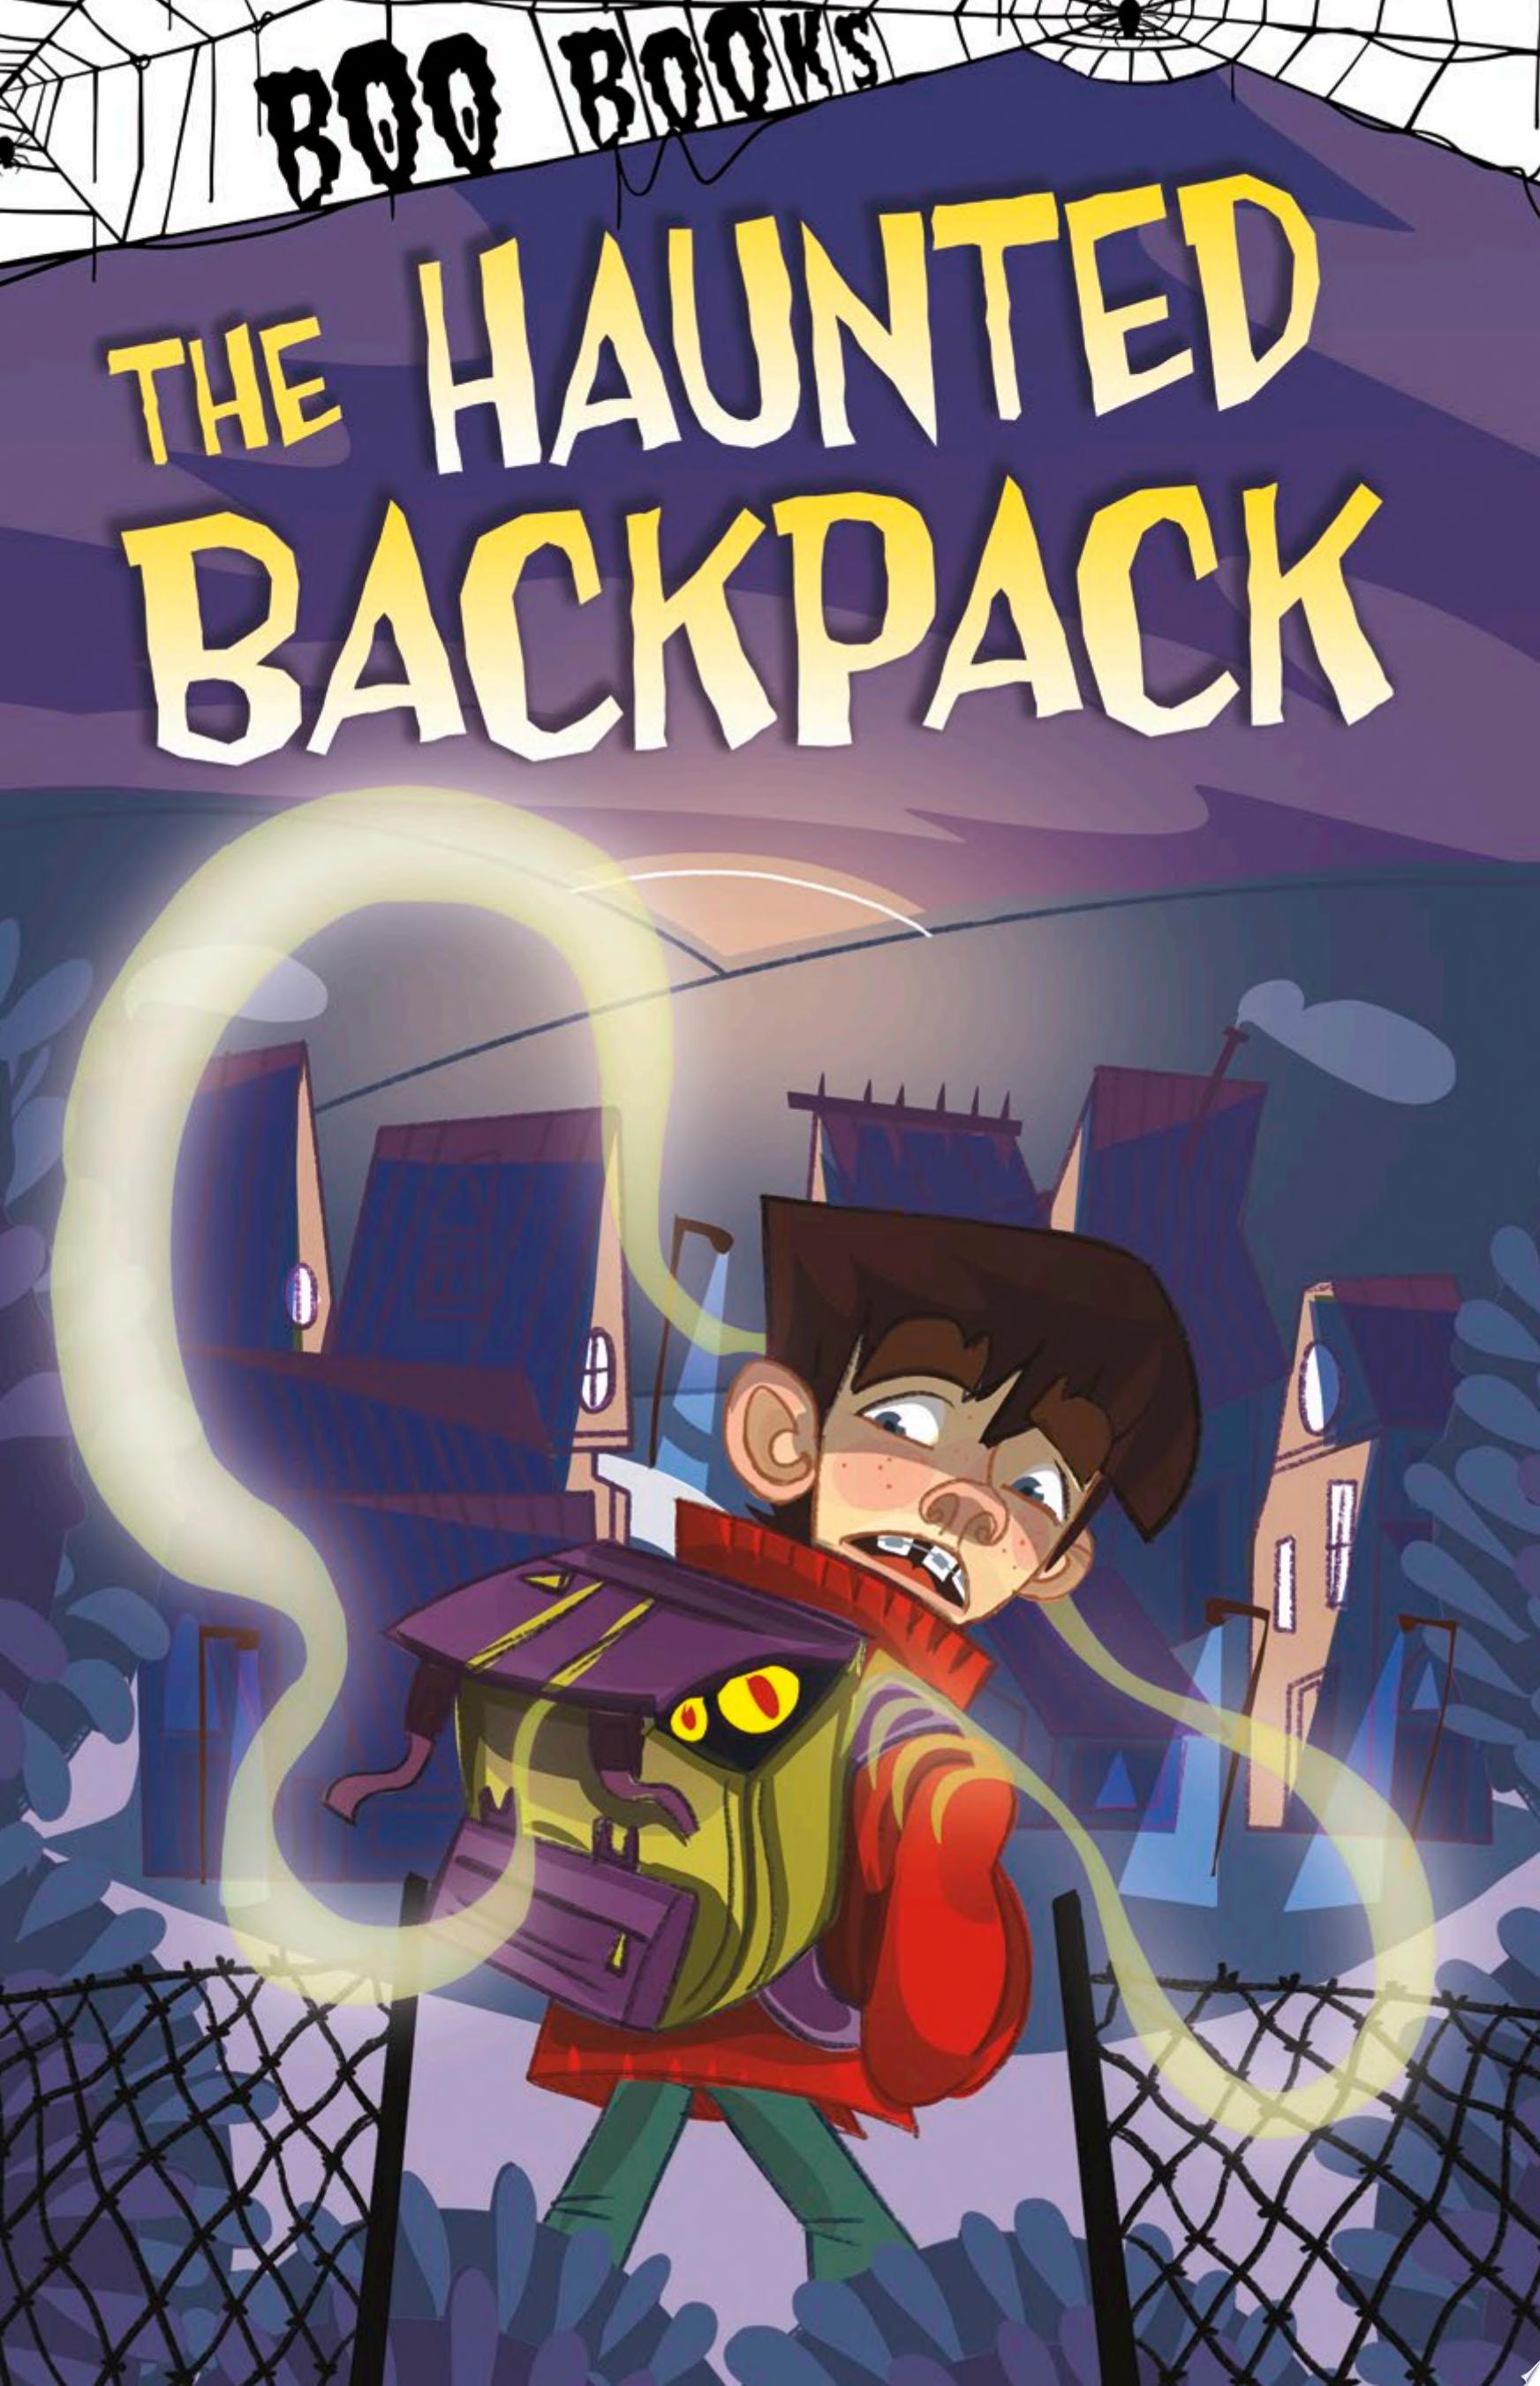 Image for "The Haunted Backpack"